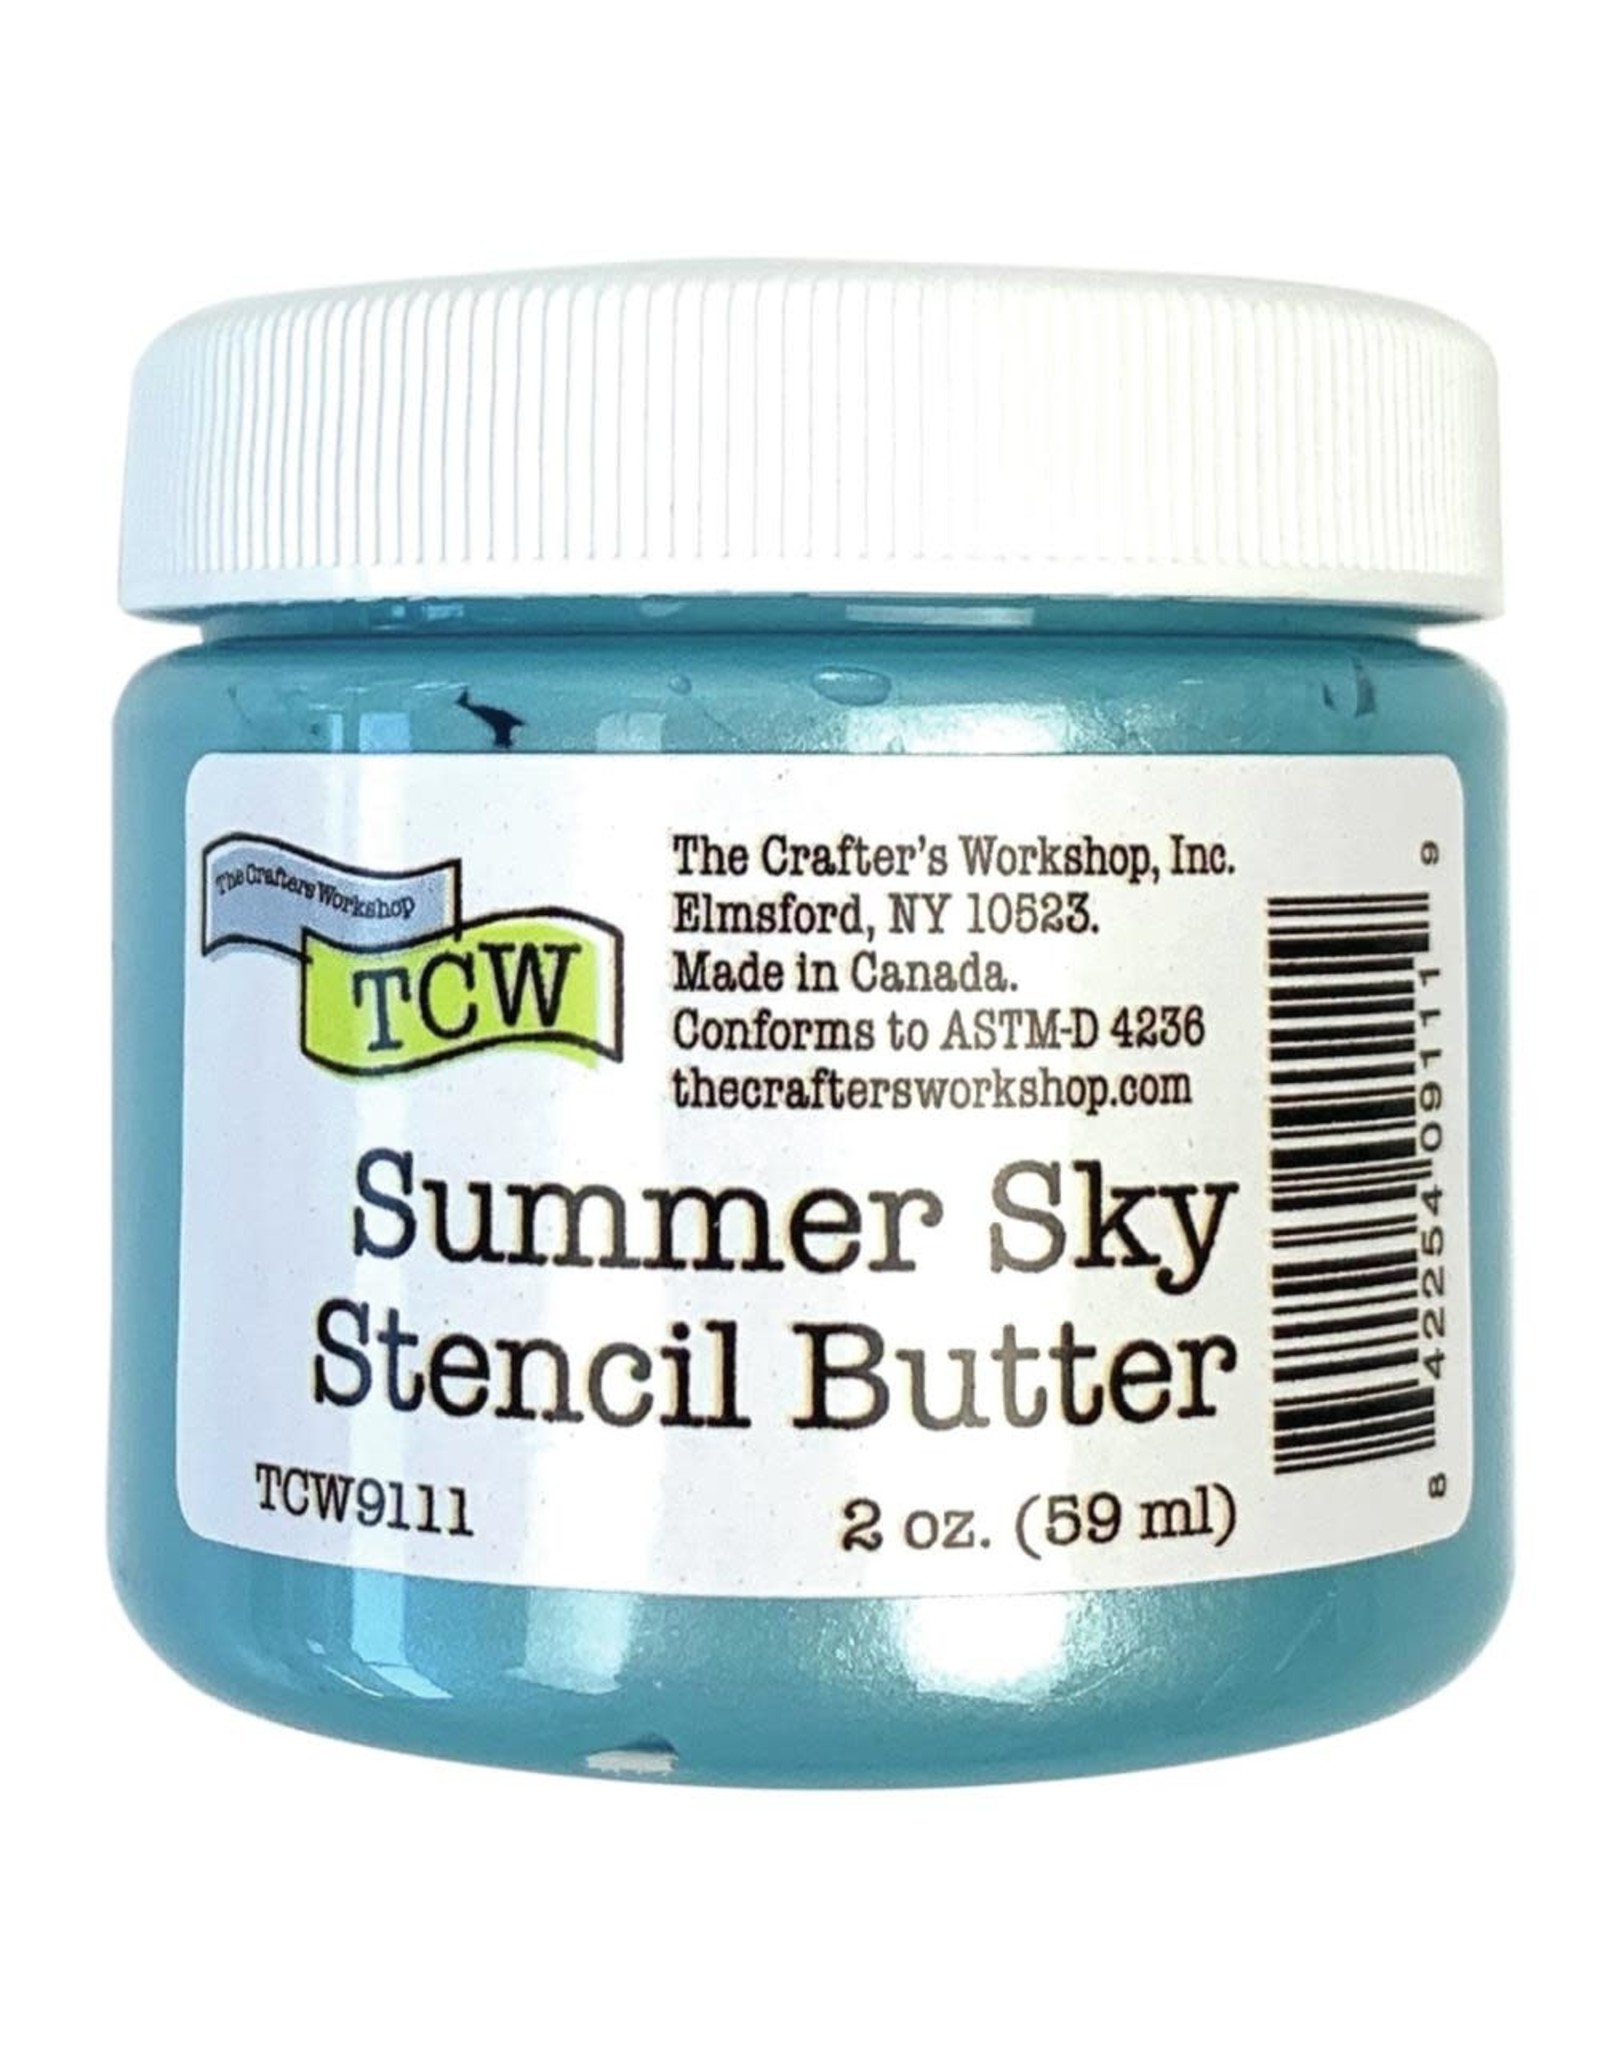 CRAFTERS WORKSHOP THE CRAFTERS WORKSHOP SUMMER SKY STENCIL BUTTER 2oz